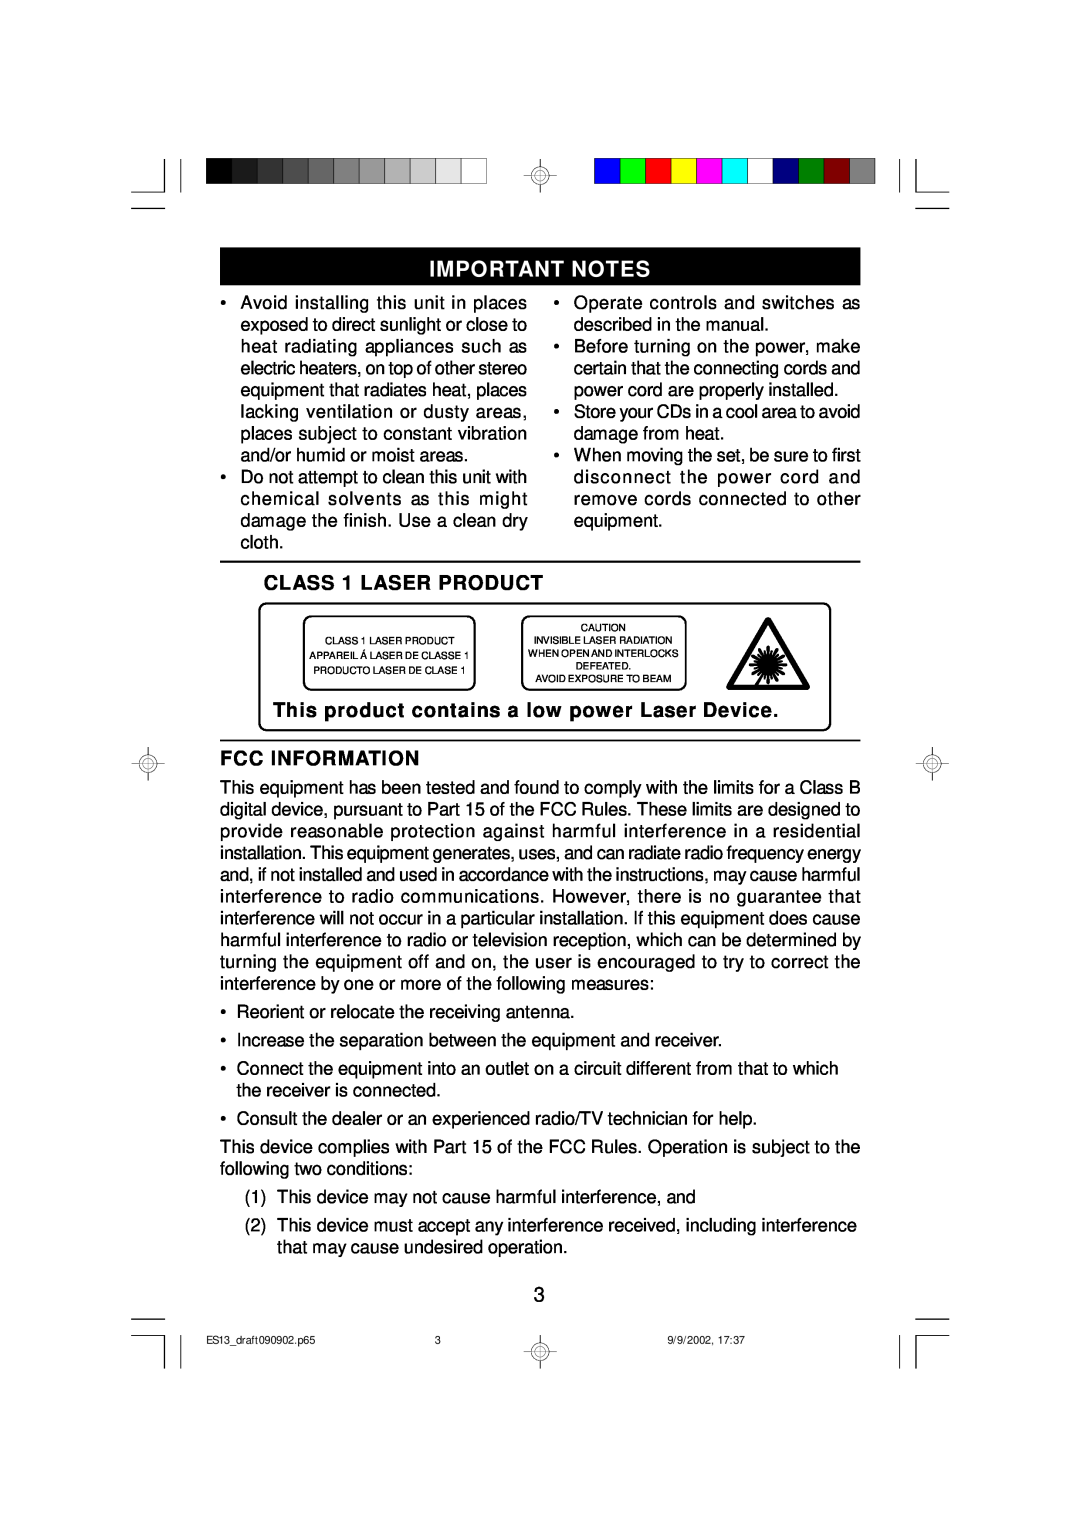 Emerson ES13 Important Notes, CLASS 1 LASER PRODUCT, This product contains a low power Laser Device, Fcc Information 